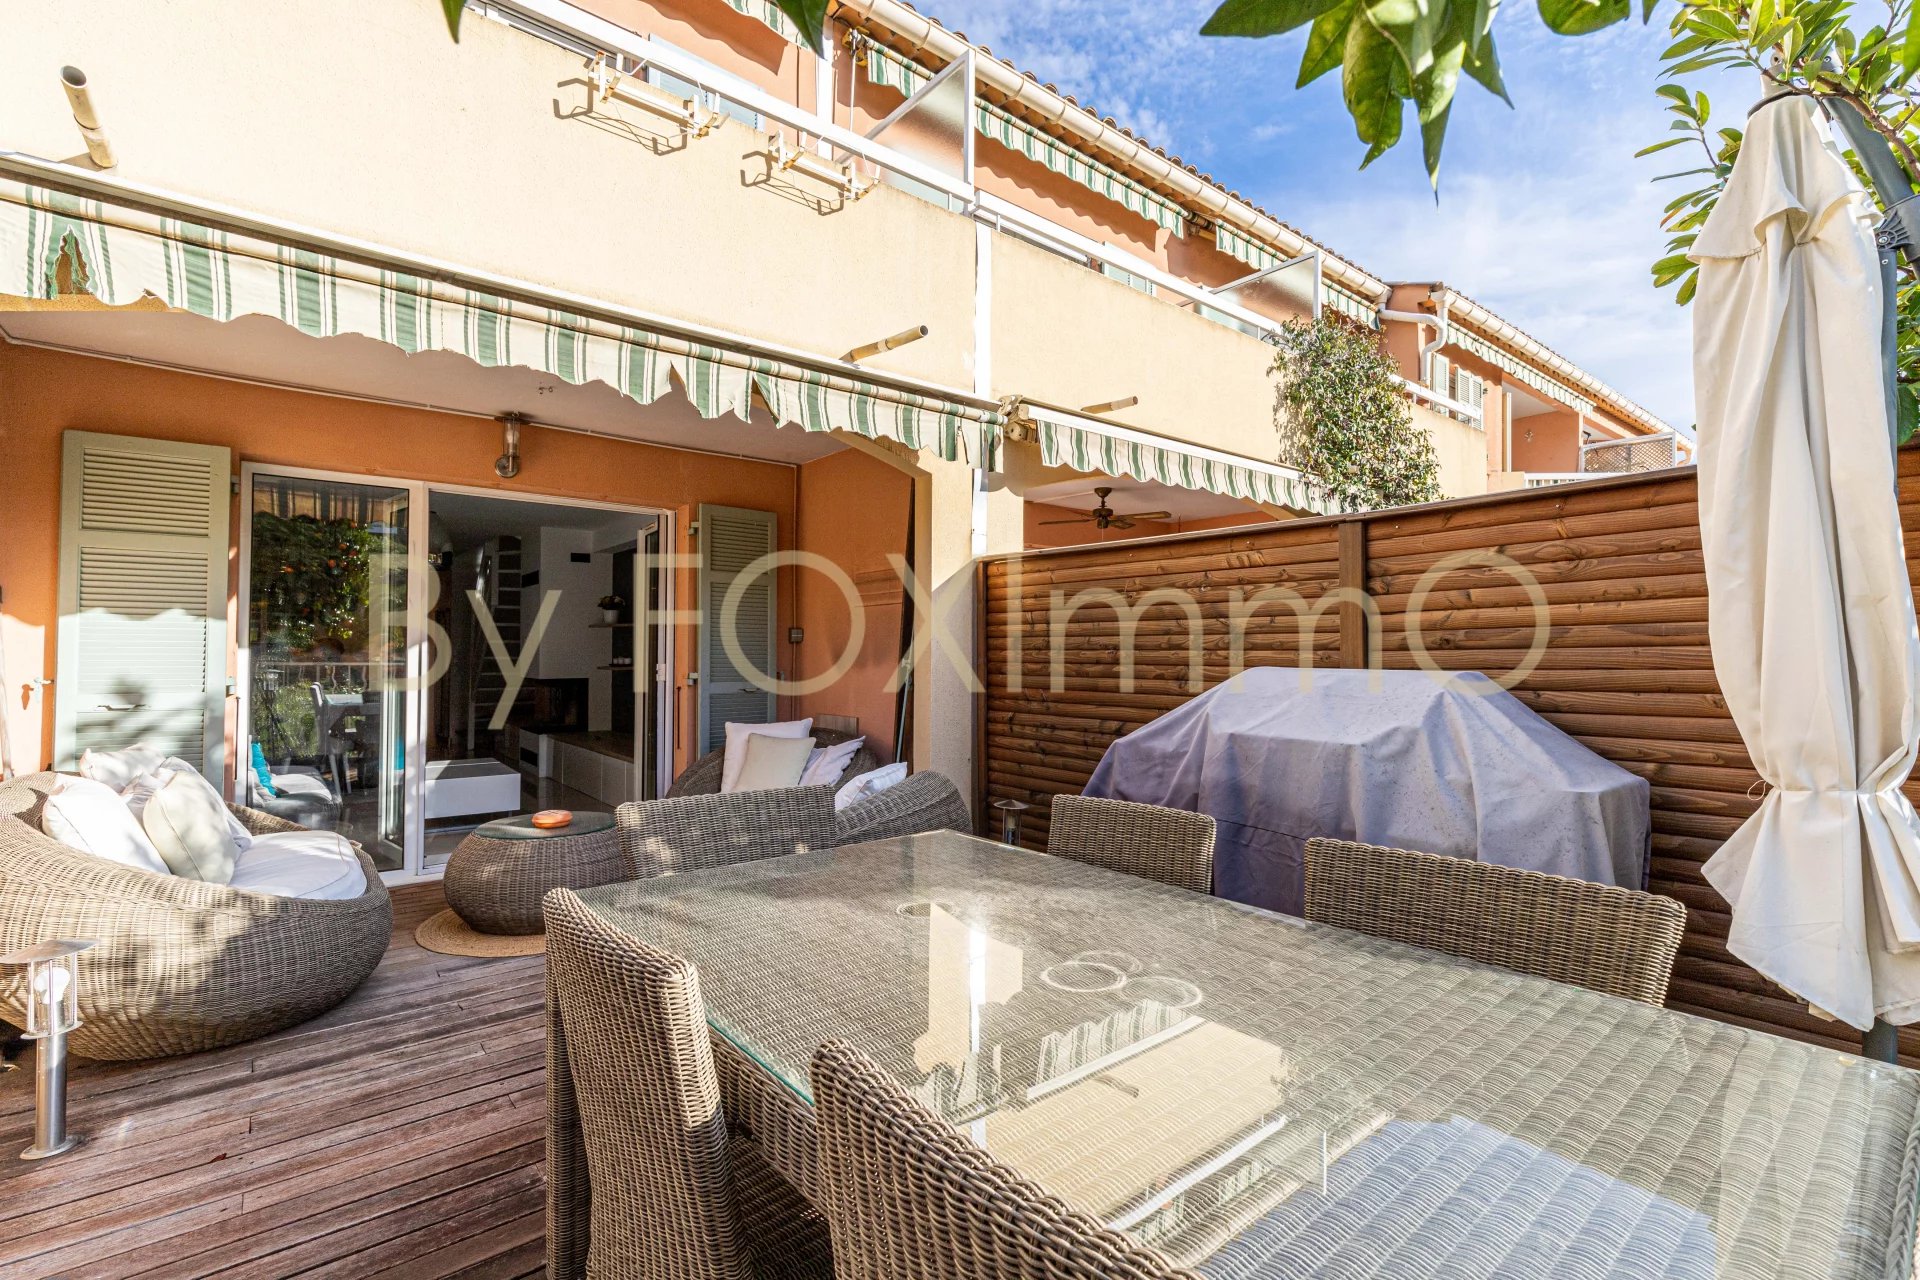 For sale on the French Riviera, magnificent 3 room duplex apartment with garage and pool